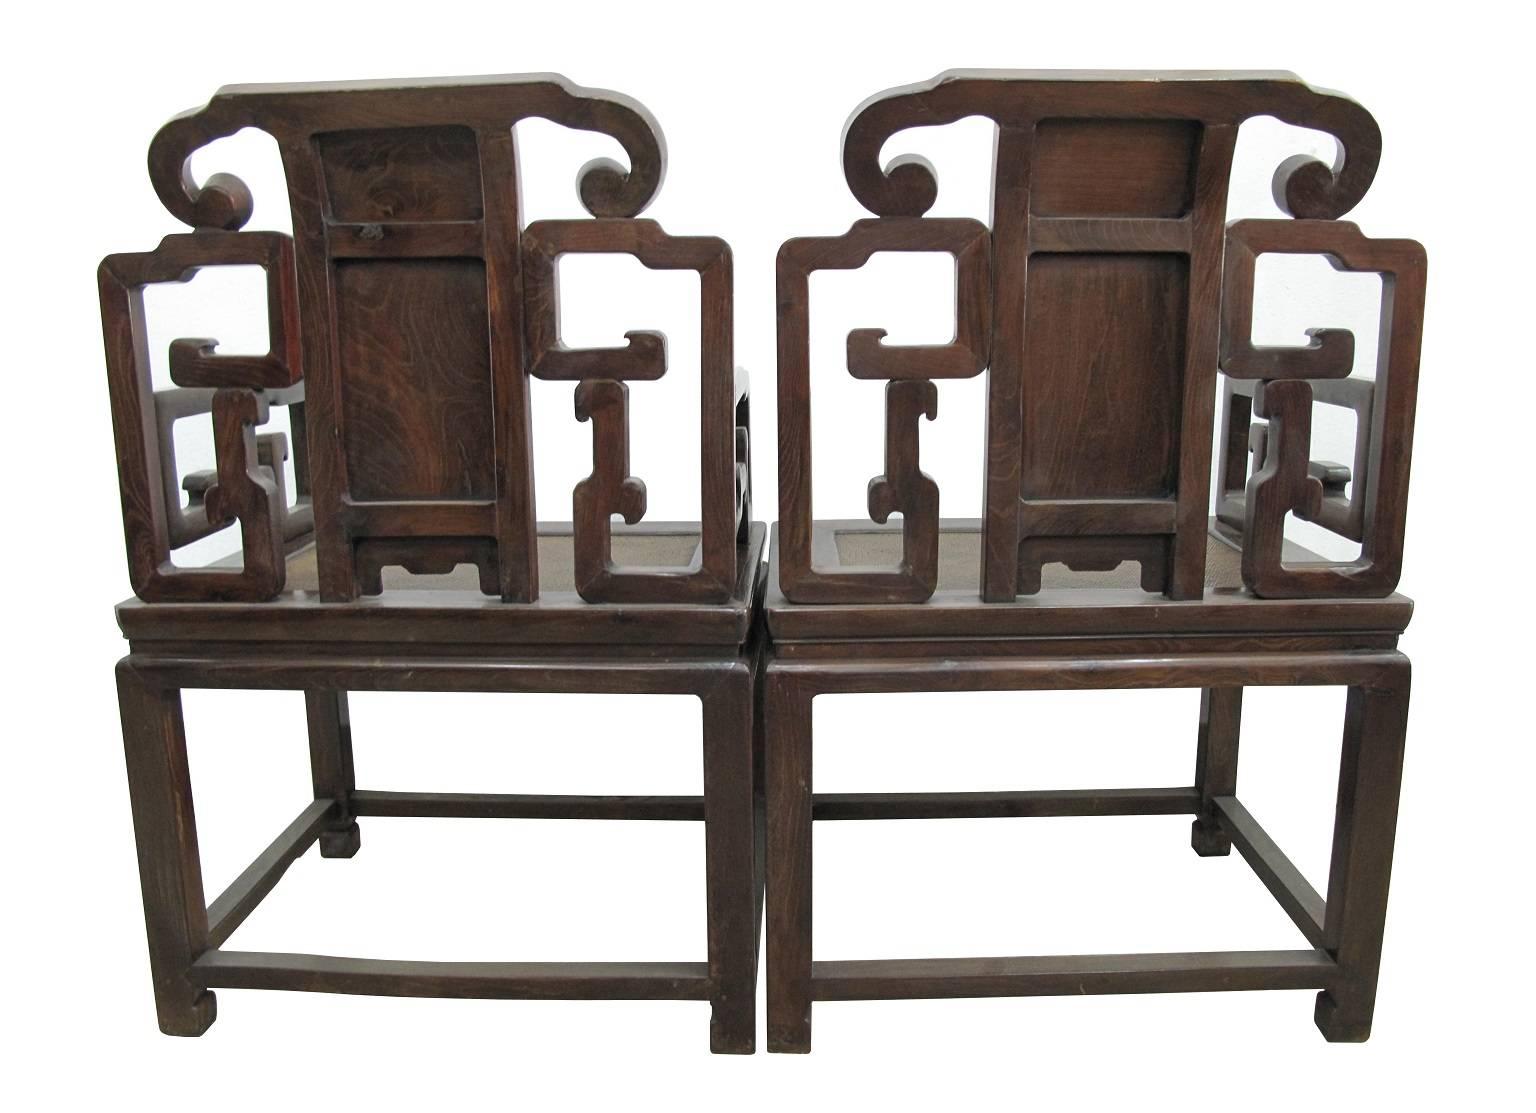 Pair of Early 19th Century Chinese Low-Back Armchairs in Rare Zhazhen Wood For Sale 1